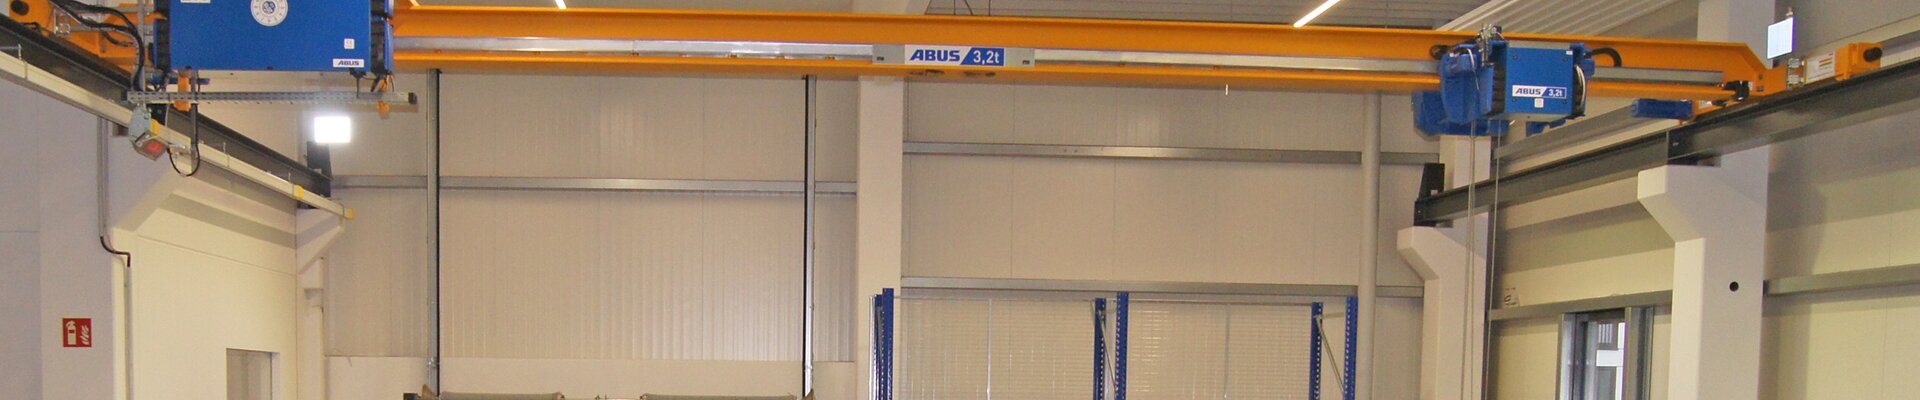 Single girder travelling crane at TUHH for practical and theoretical intralogistics